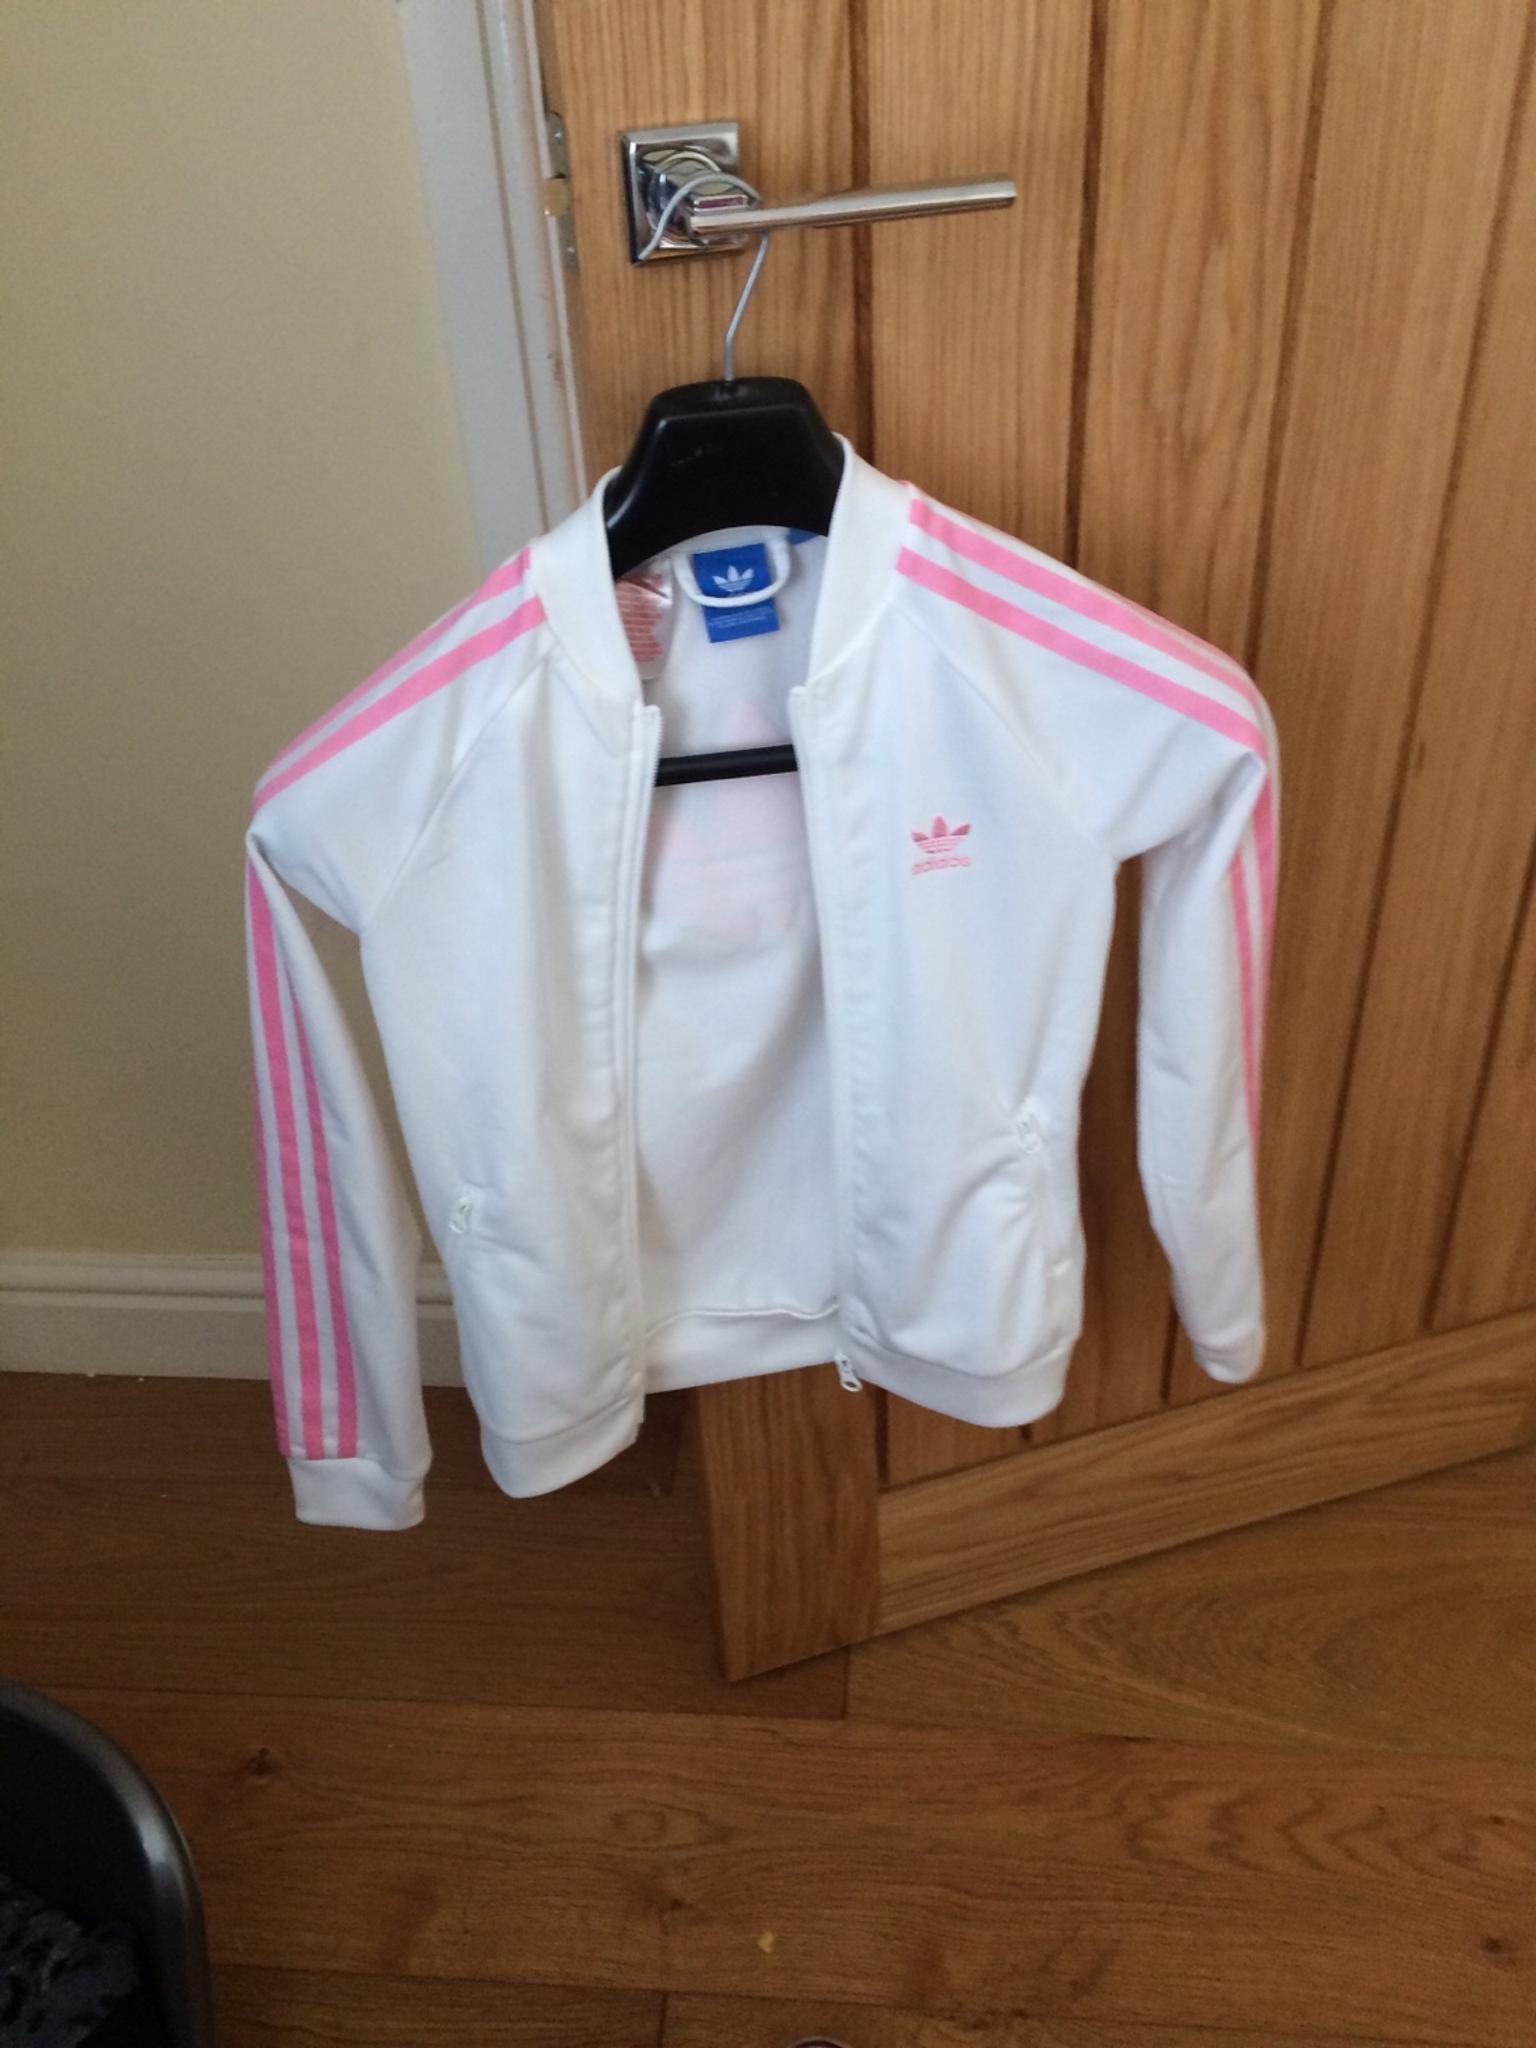 pink adidas jacket with white stripes